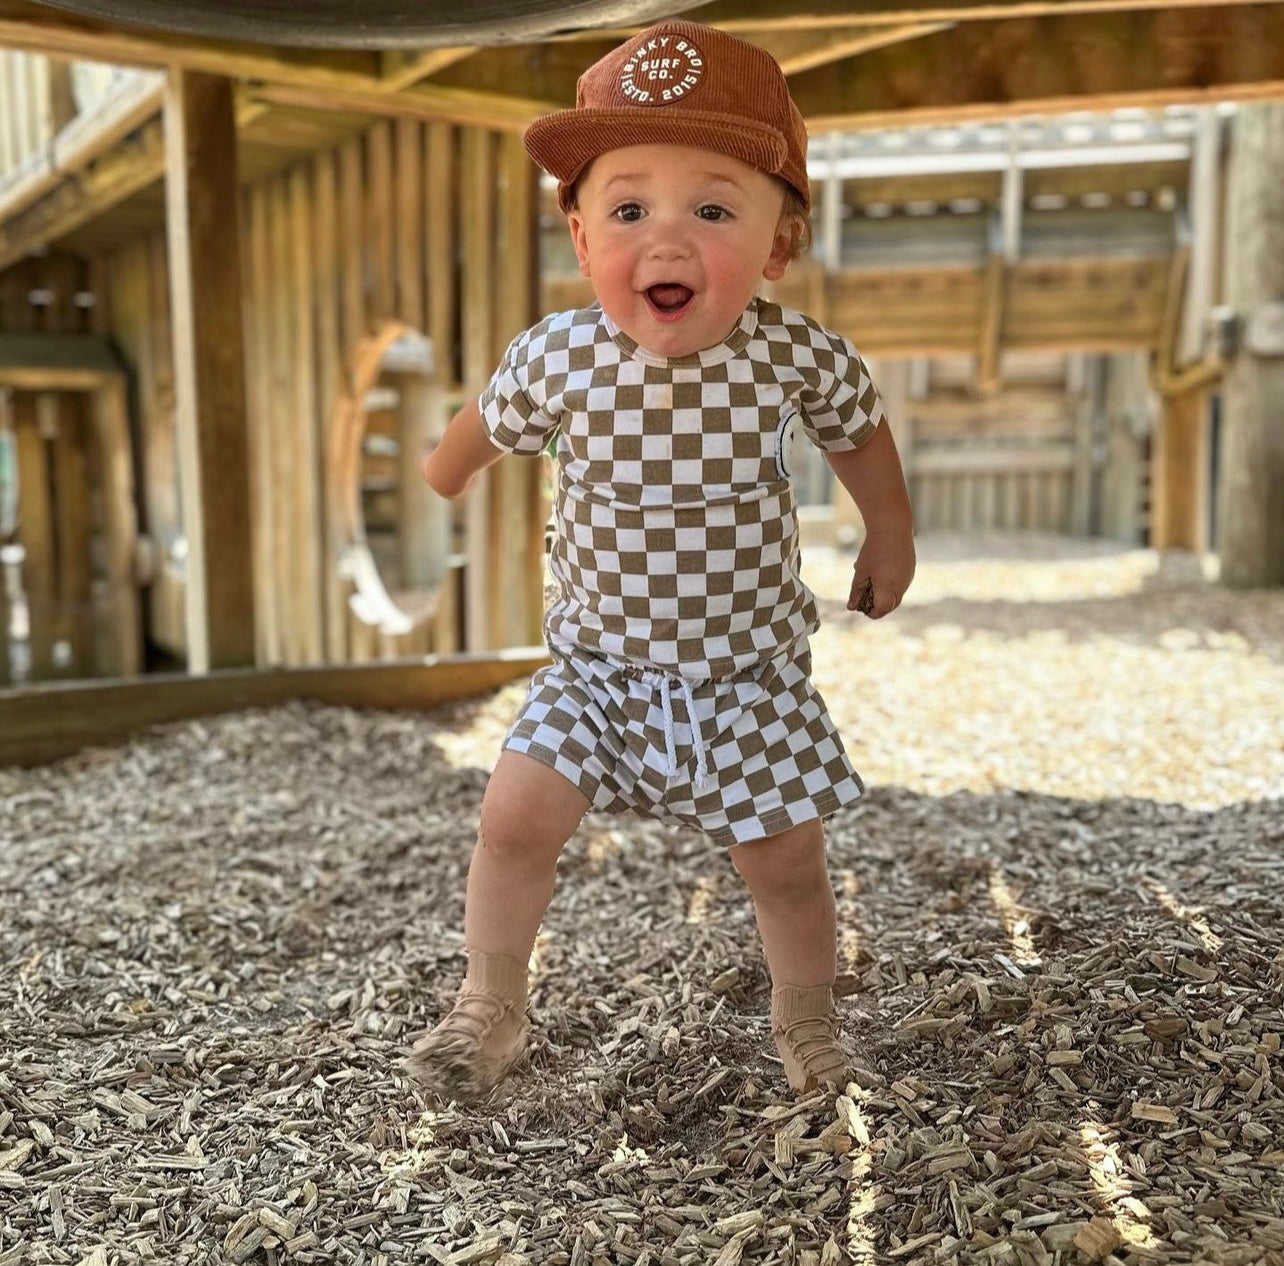 Toddler jumping with baseball cap in first shoes